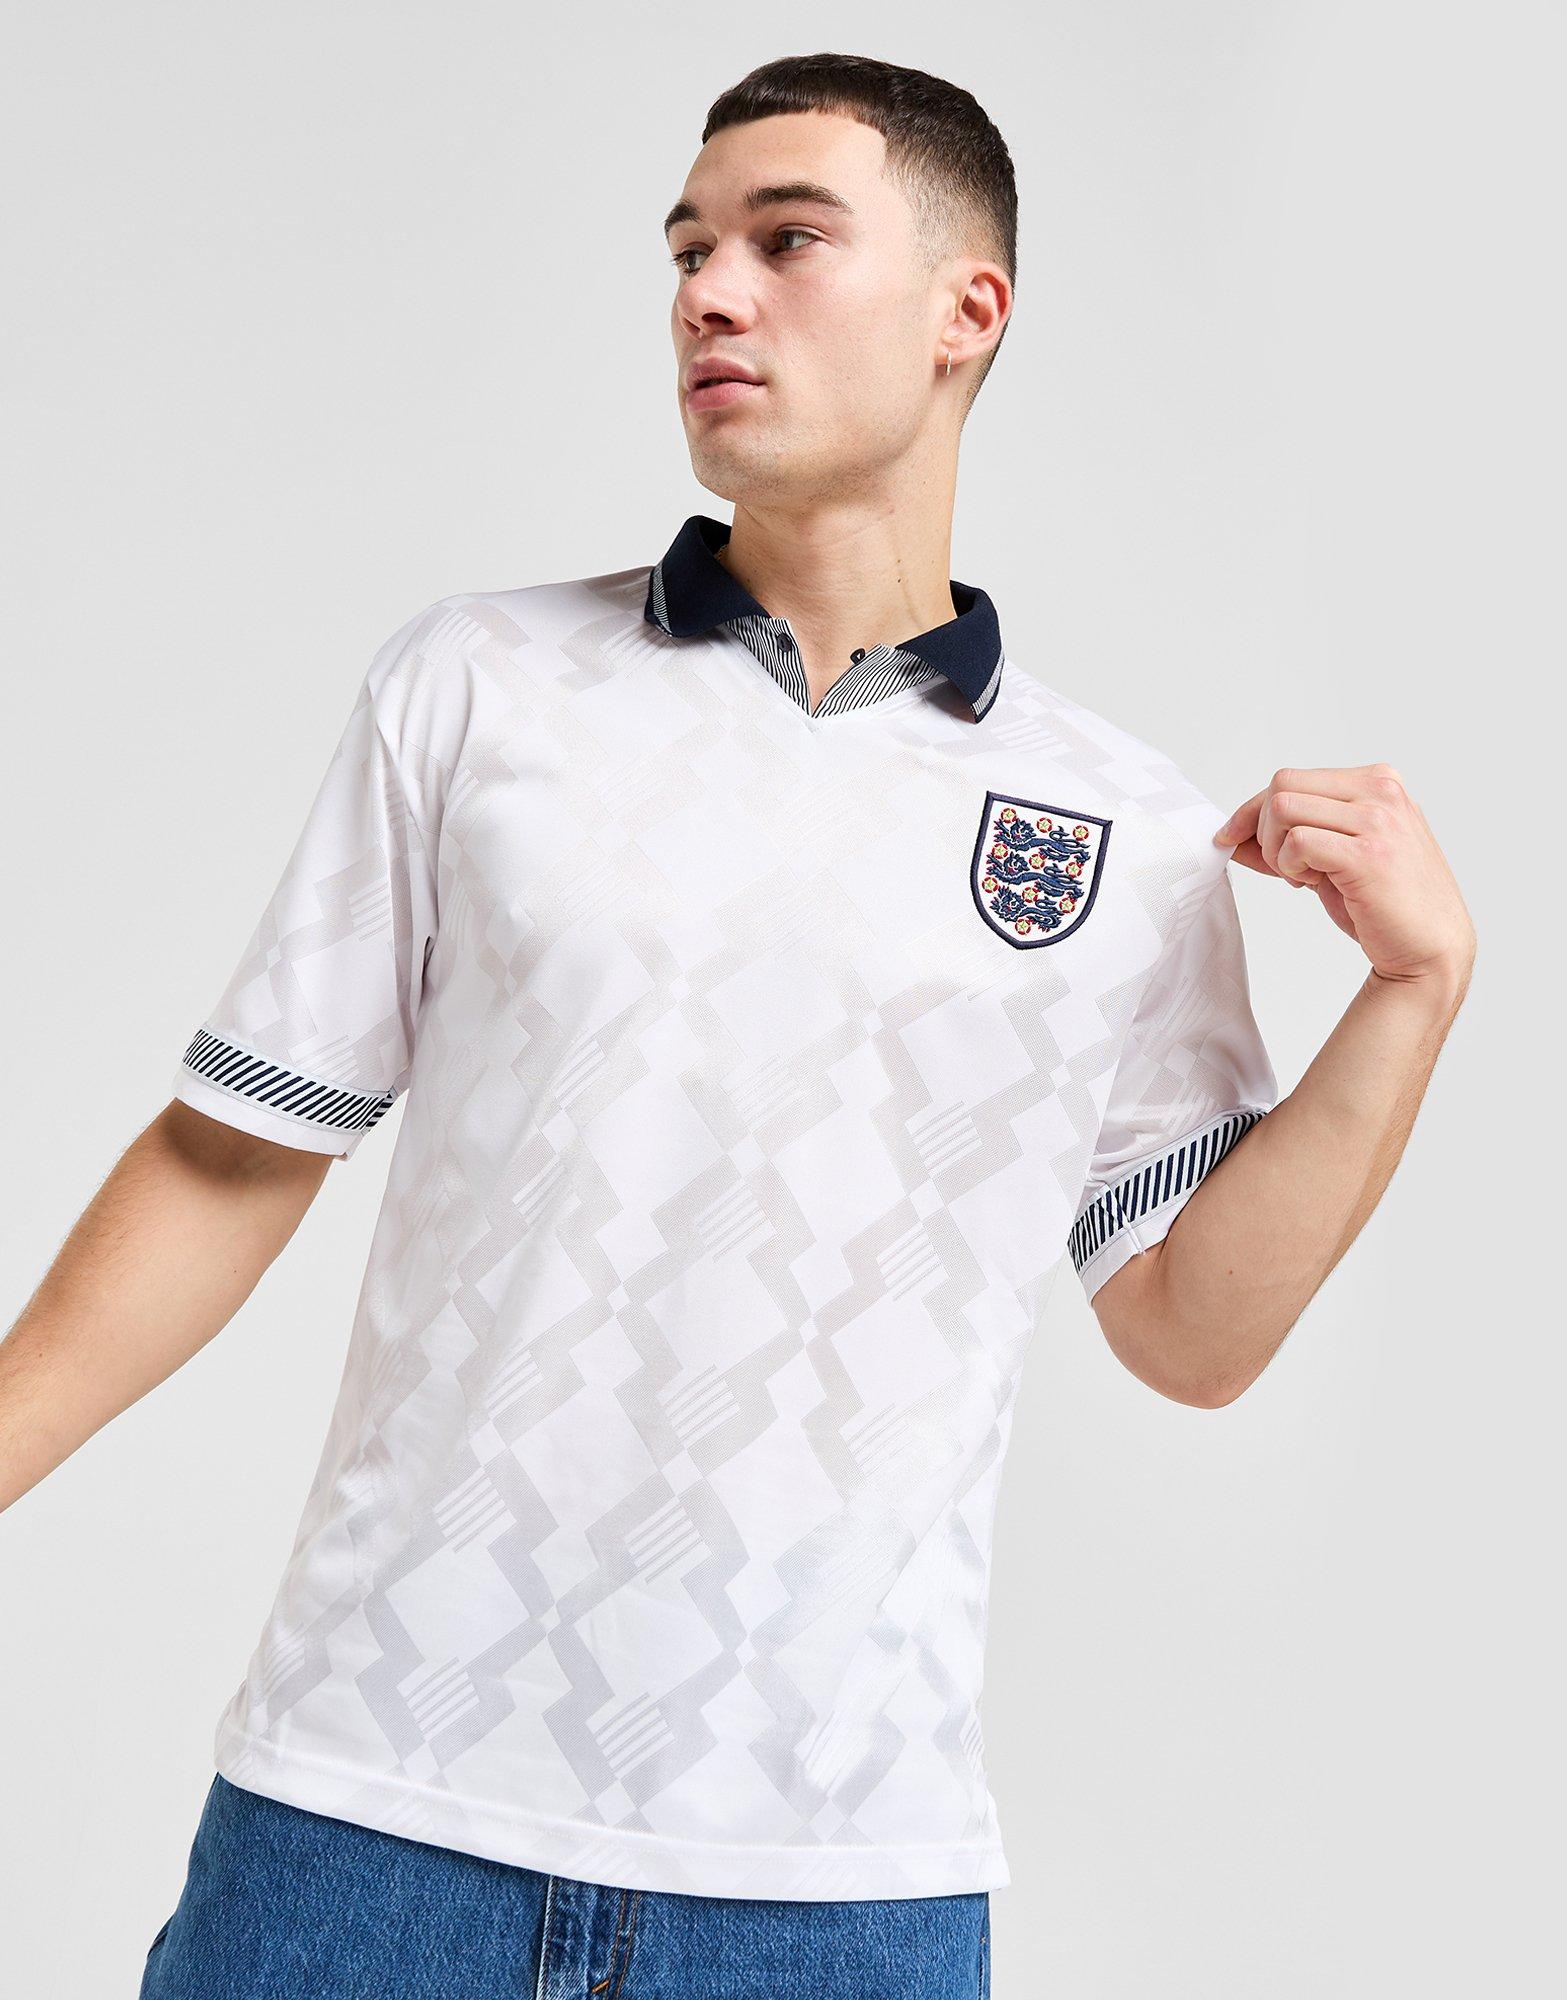 england strip for world cup